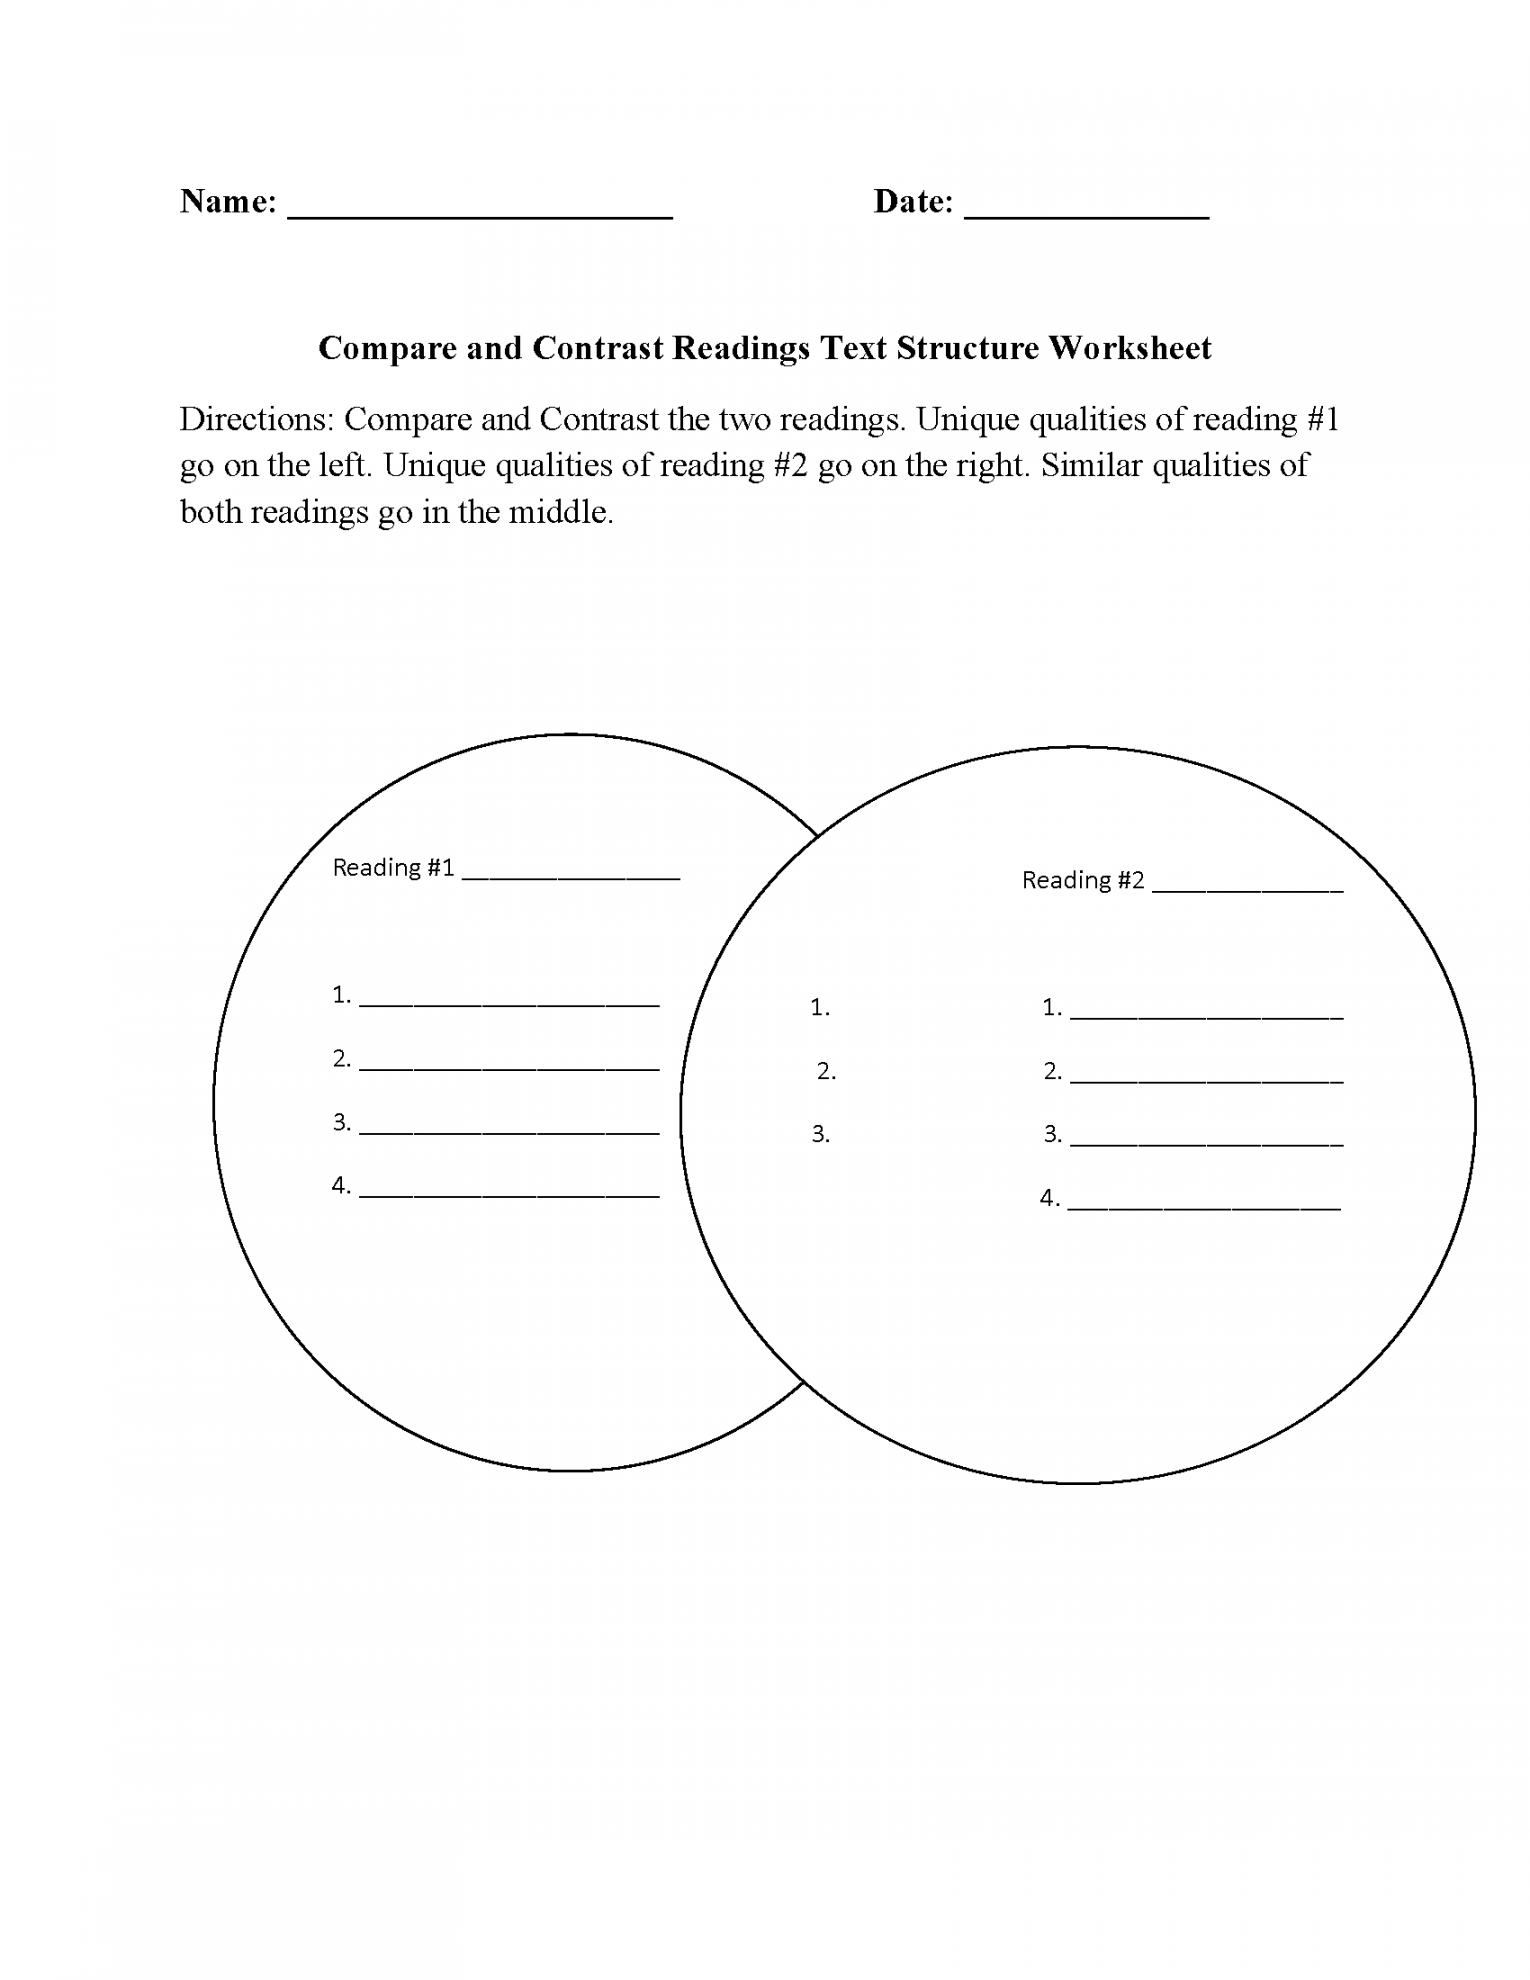 Text Structure Worksheets  Compare and Contrast Readings Text